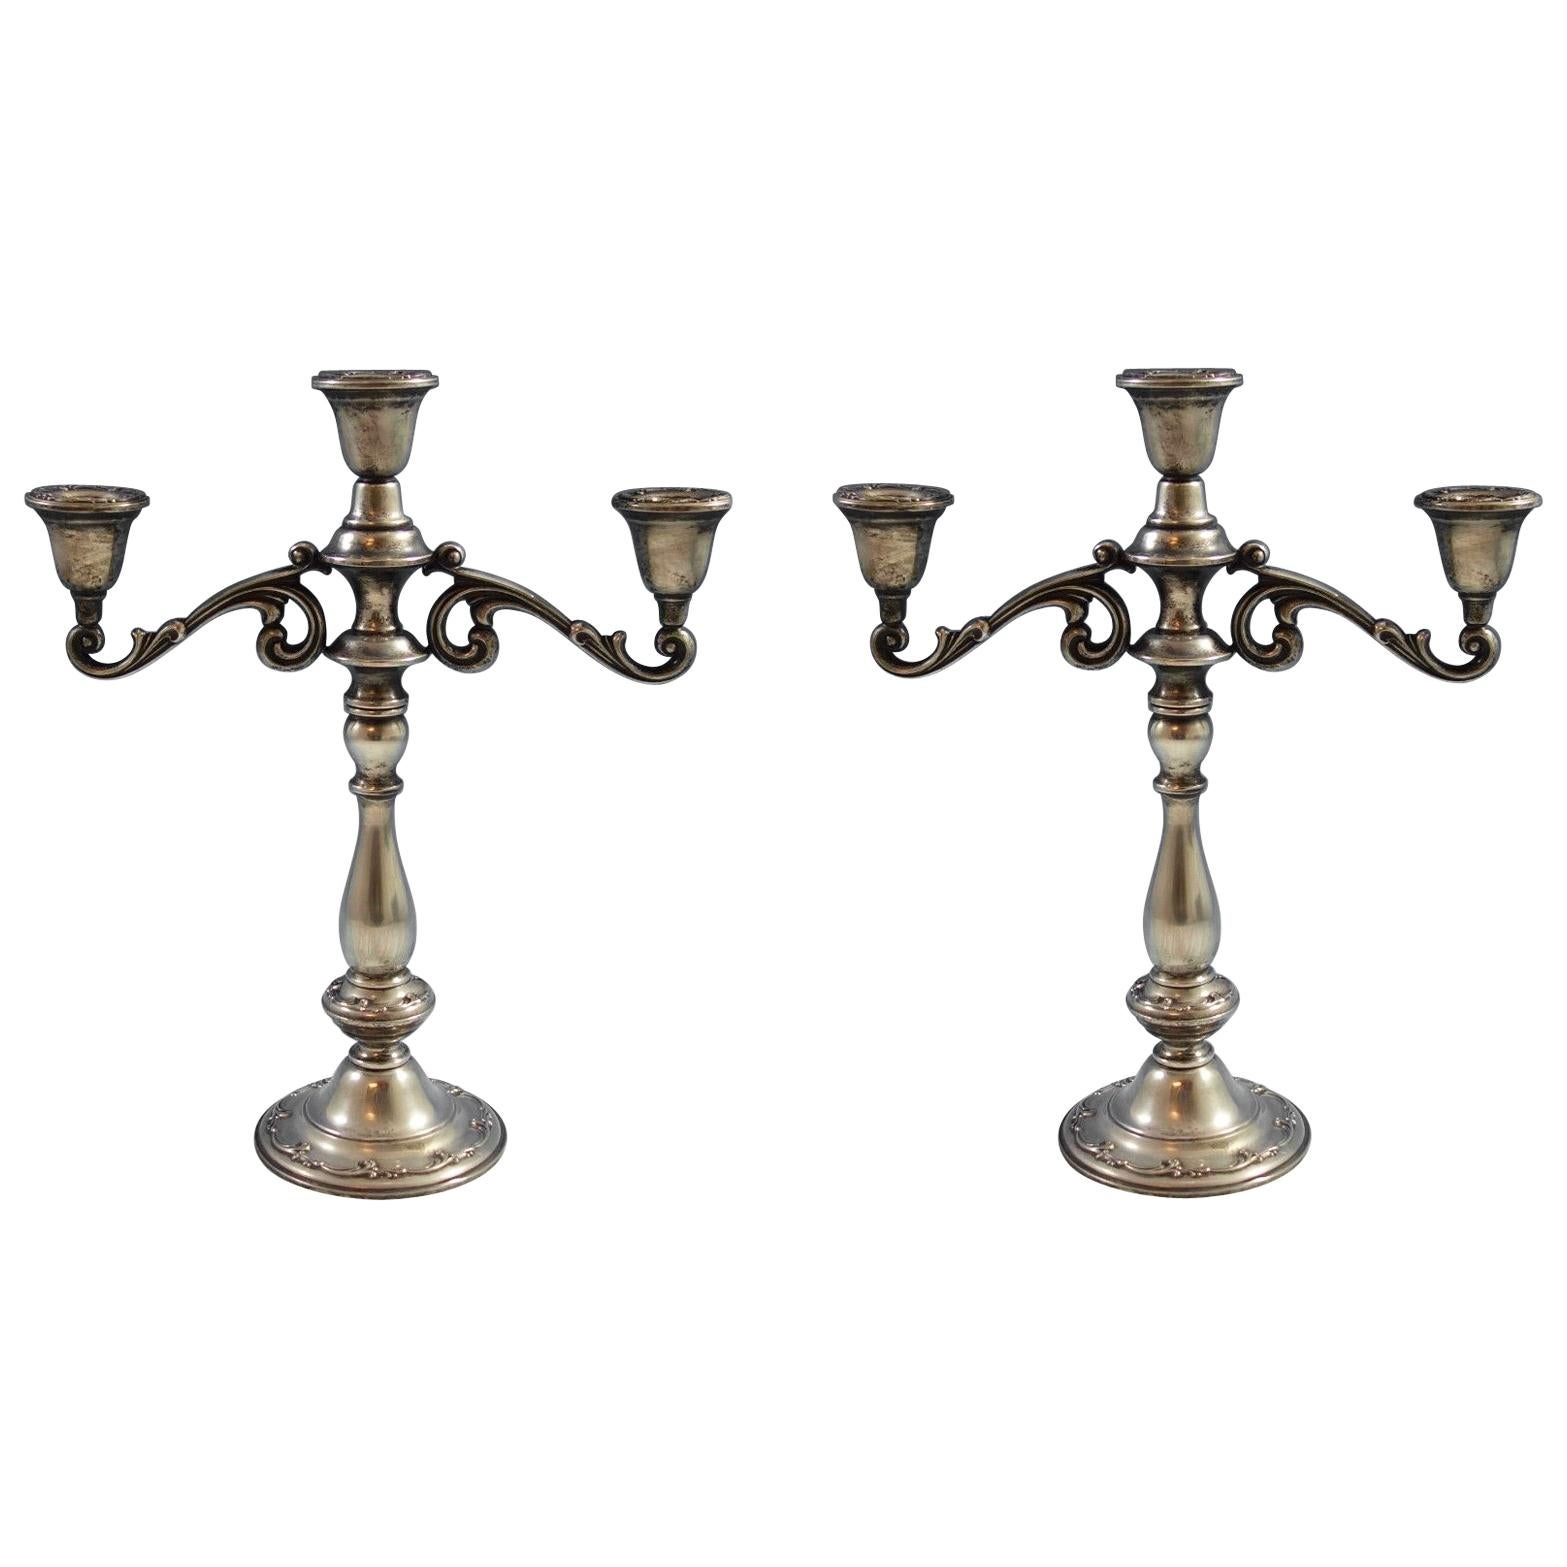 Angelique by International Sterling Silver Candelabra Pair #127/65 3-Light